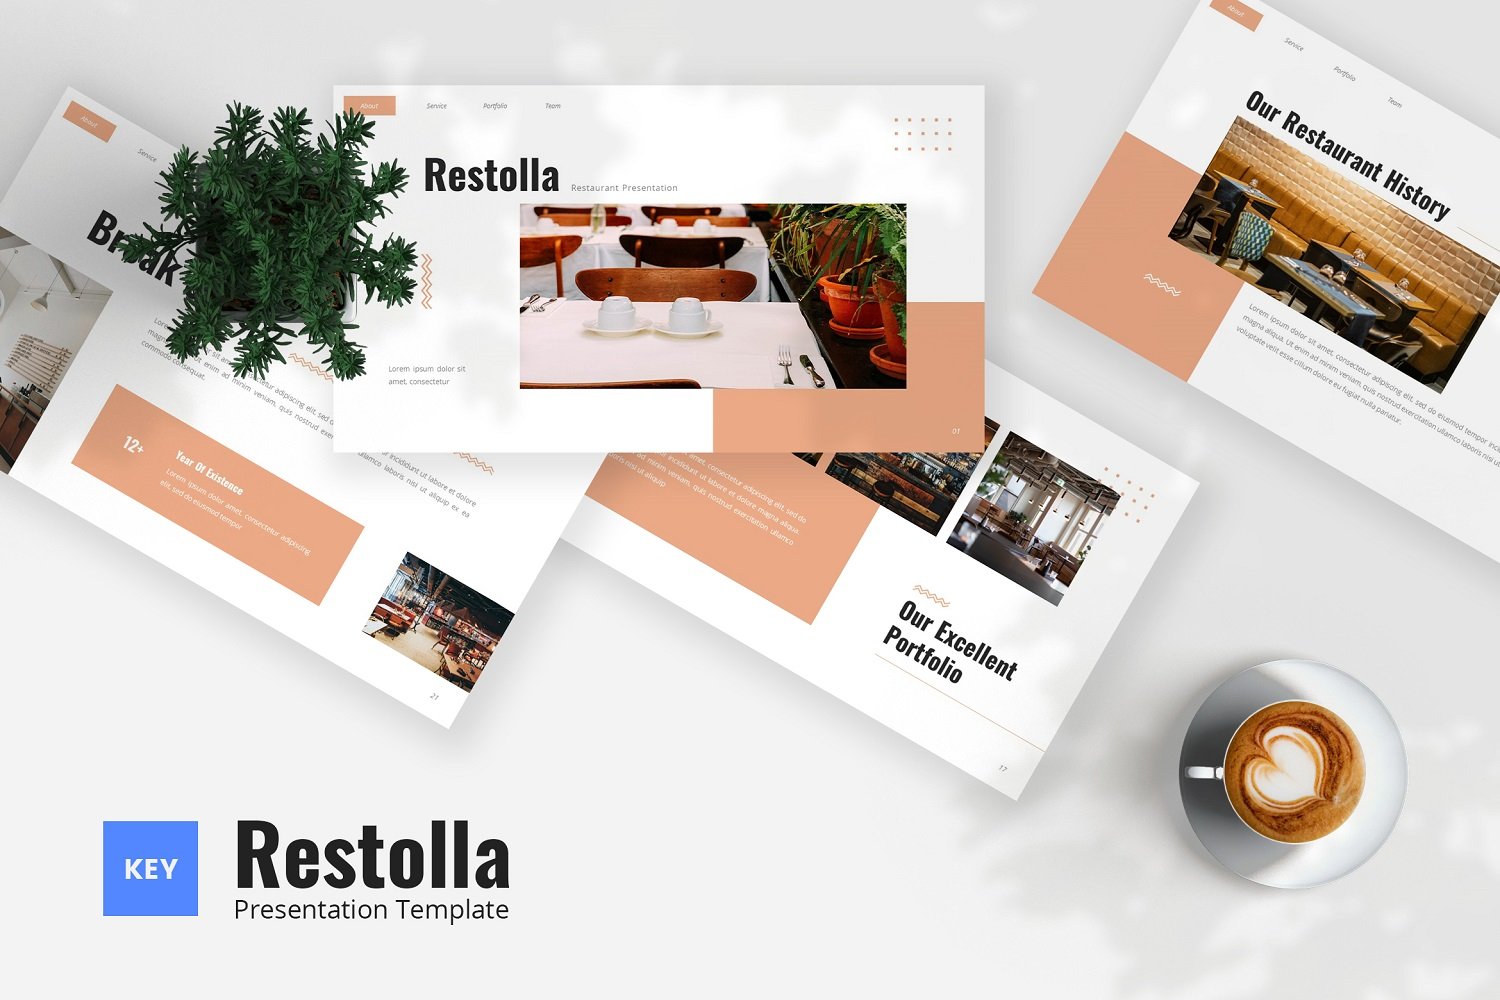 Restolla - Food and Restaurant Keynote Template